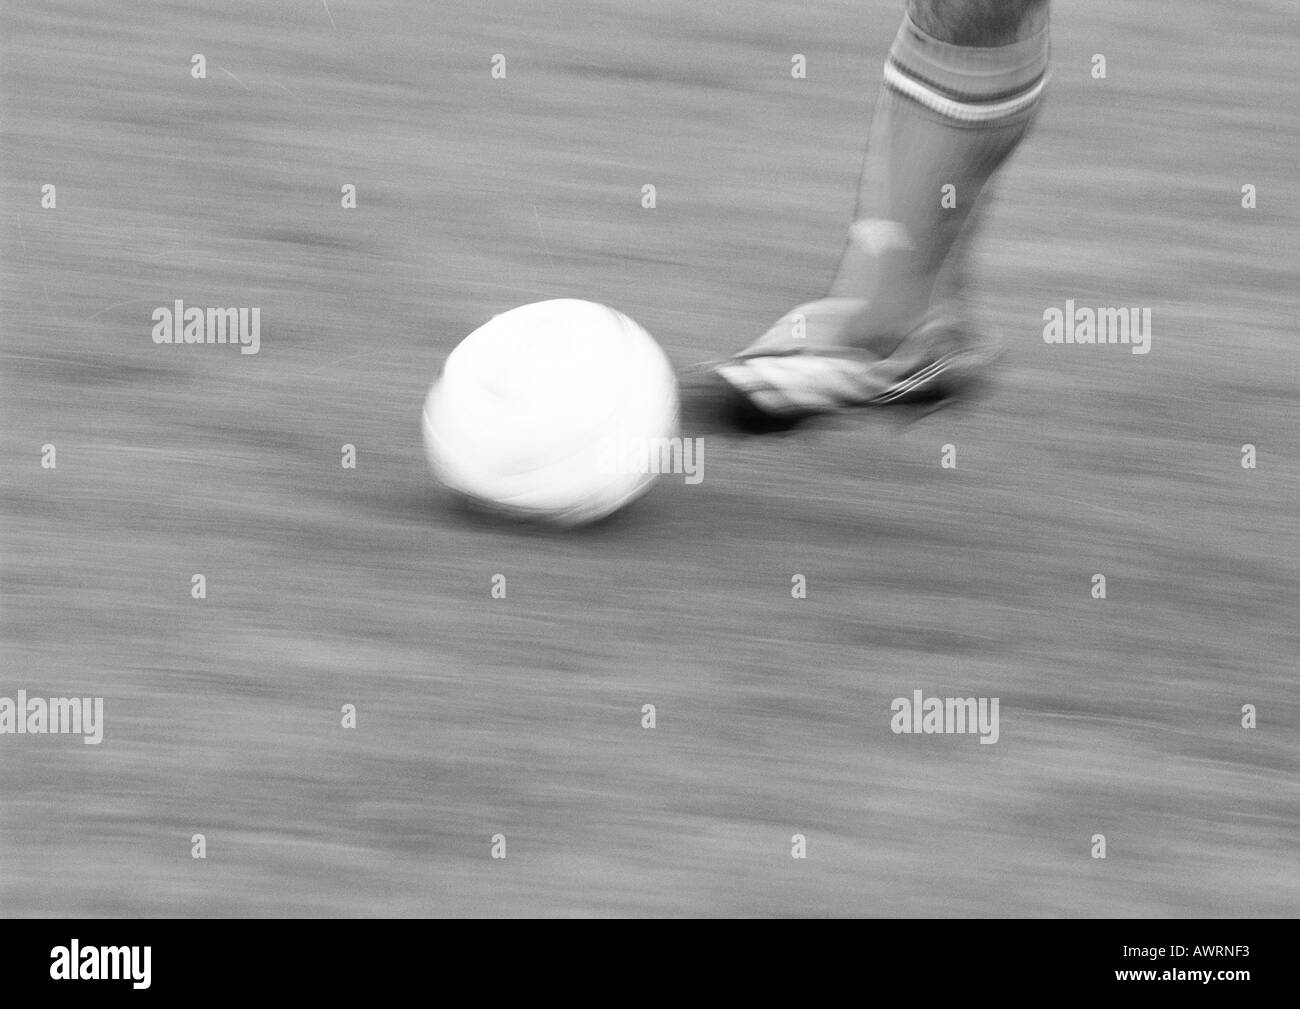 Foot of player and soccer ball, blurred, b&w. Stock Photo